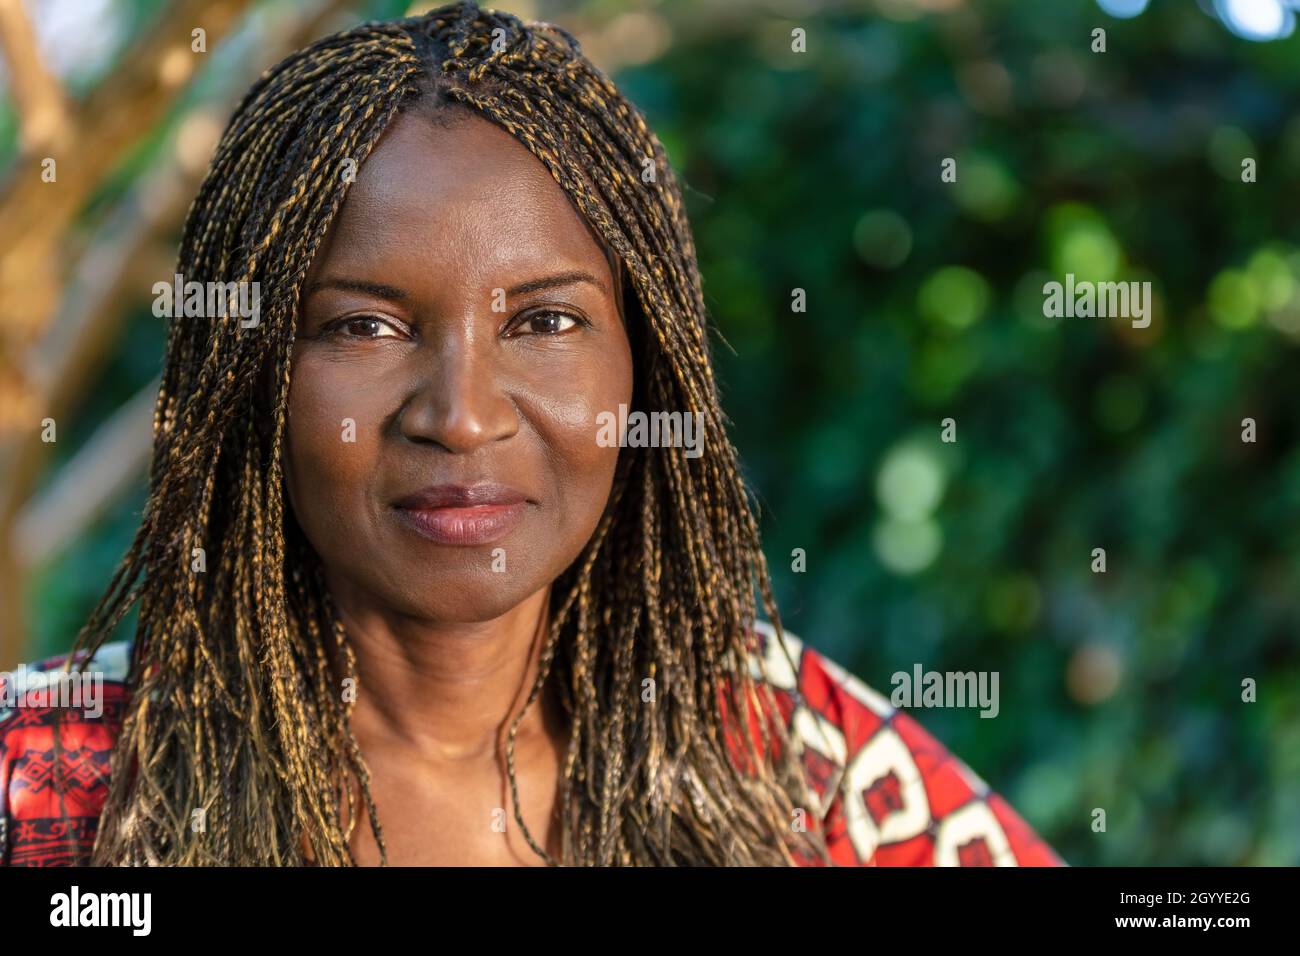 Attractive African or African American middle aged woman, female in Africa, with braided hair in braids, wearing traditional clothes Stock Photo